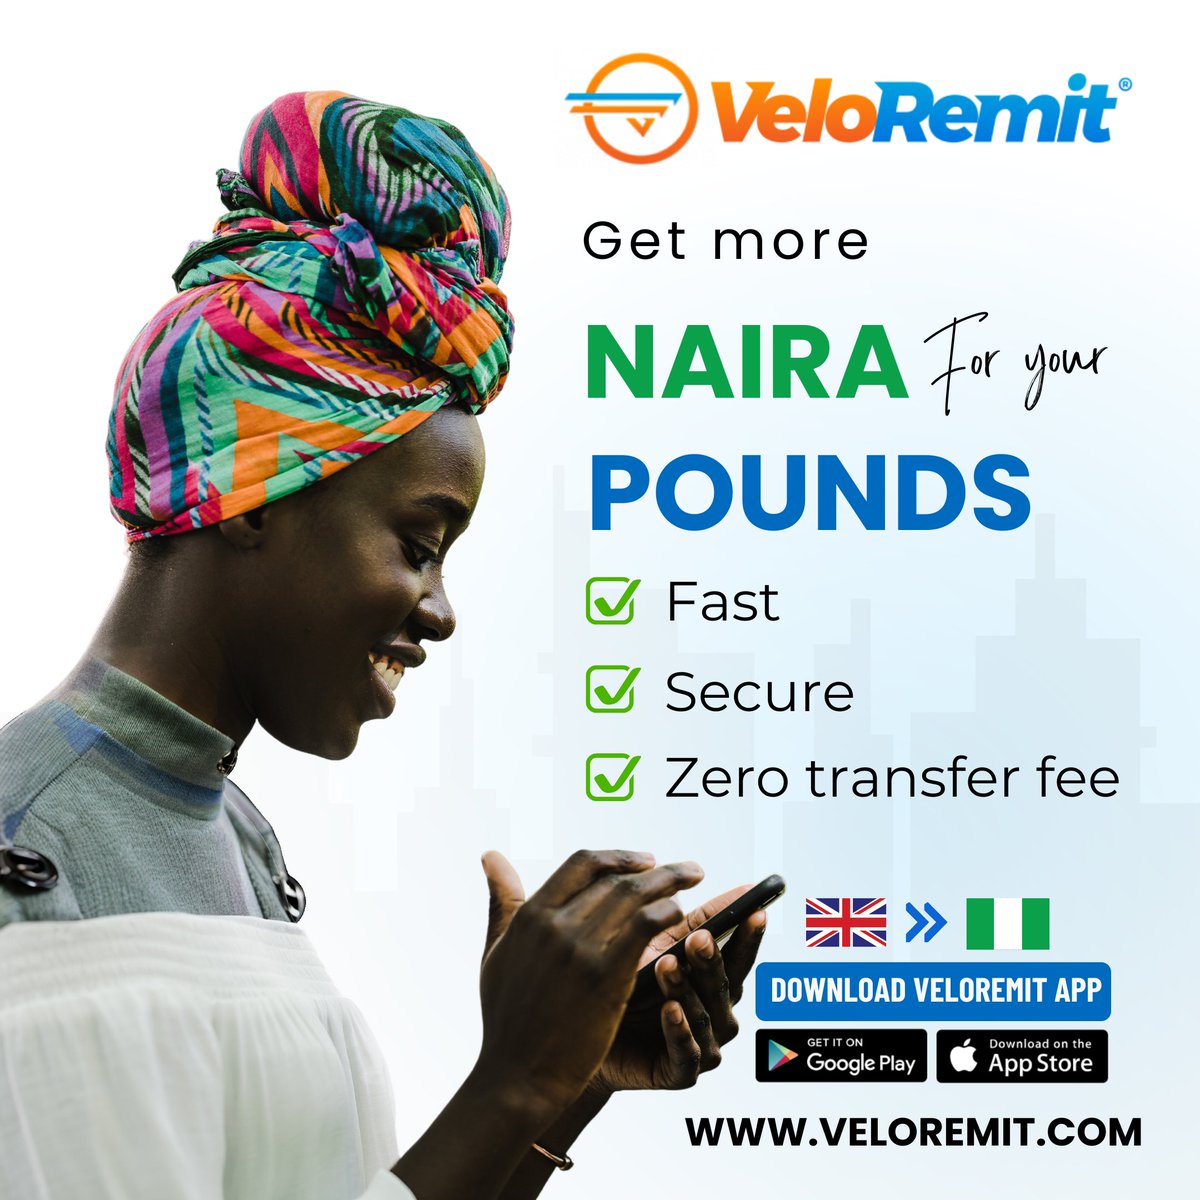 Embrace the Friday vibes! 🇬🇧🇳🇬 Whether it's paying a bill, sending a gift or supporting loved ones, VeloRemit makes it easy and secure. Have a fantastic weekend, everyone!💸✨ #veloremit #TGIF #weekendready #moneytransfer #uktonigeria #zerofee #nigeriansinuk #etioba_velo✅